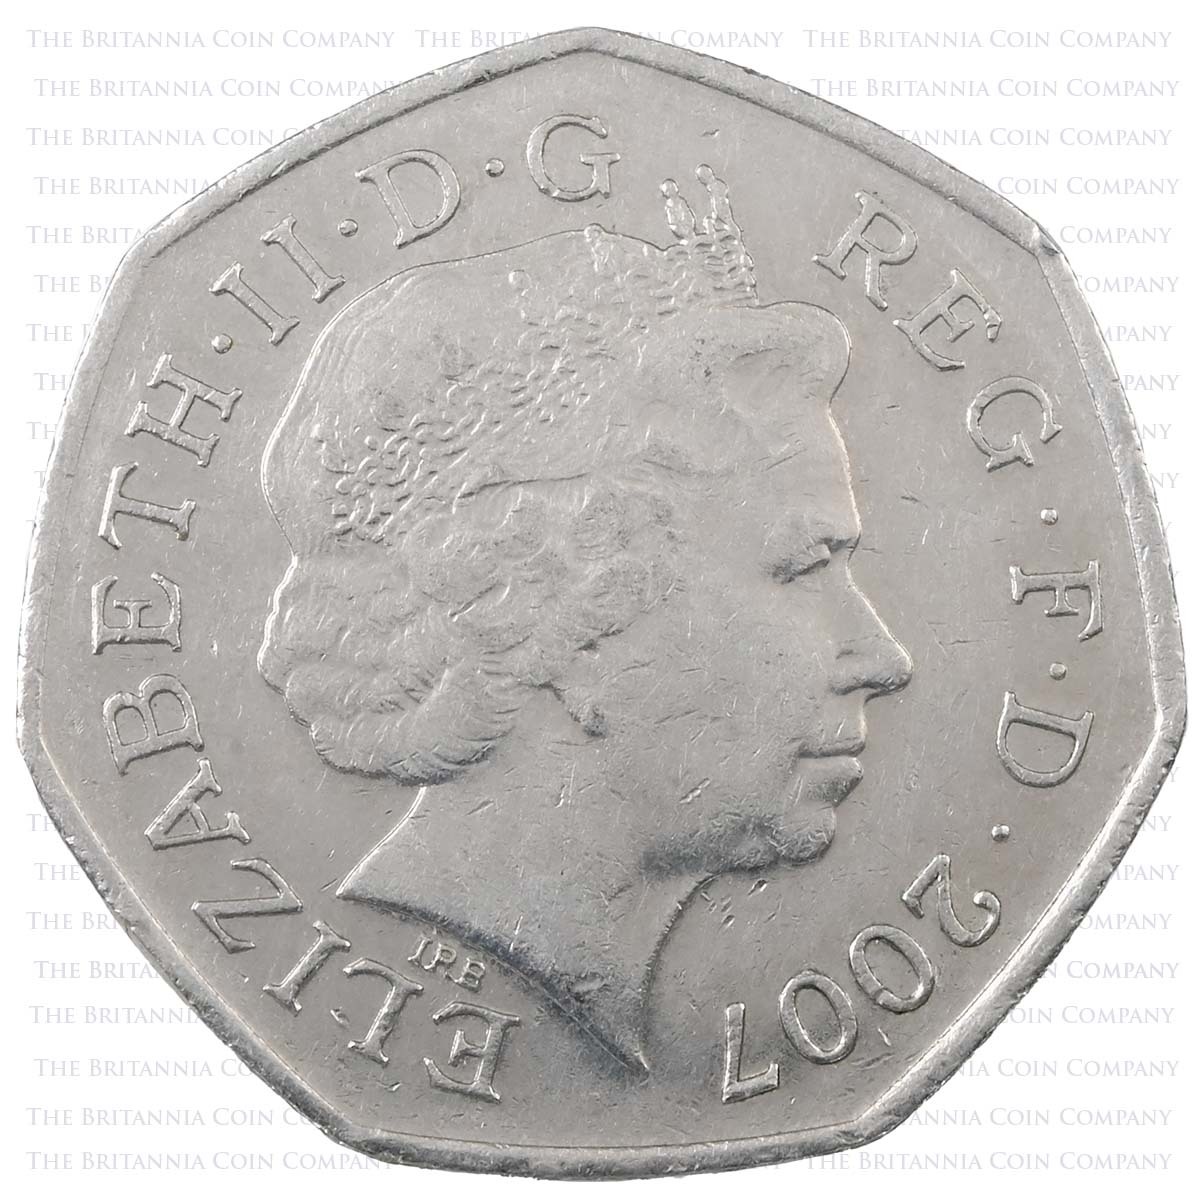 2007 Boy Scouting Be Prepared Circulated Fifty Pence Coin Obverse